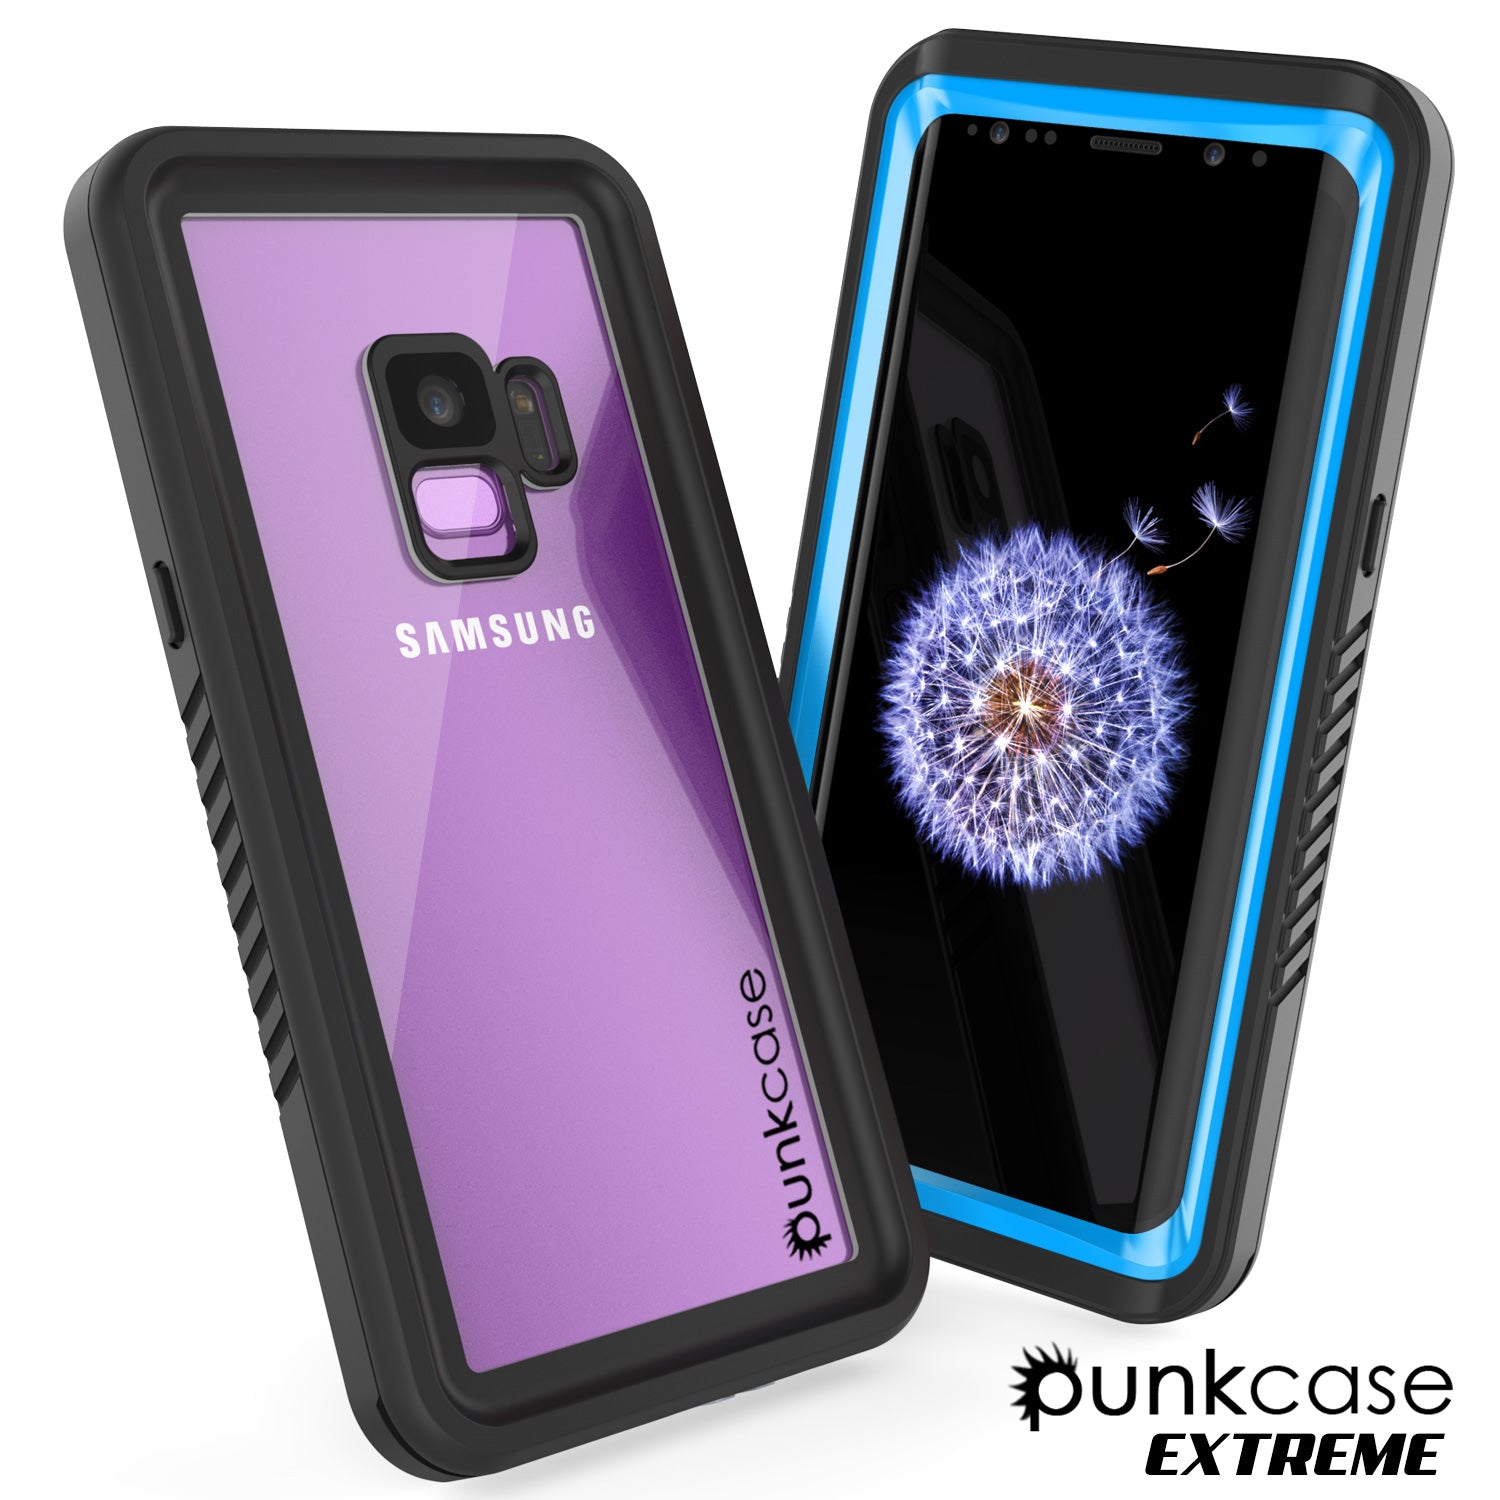 Galaxy S9 Punkcase Extreme Armor Cover W/ Built In Screen [Light blue]